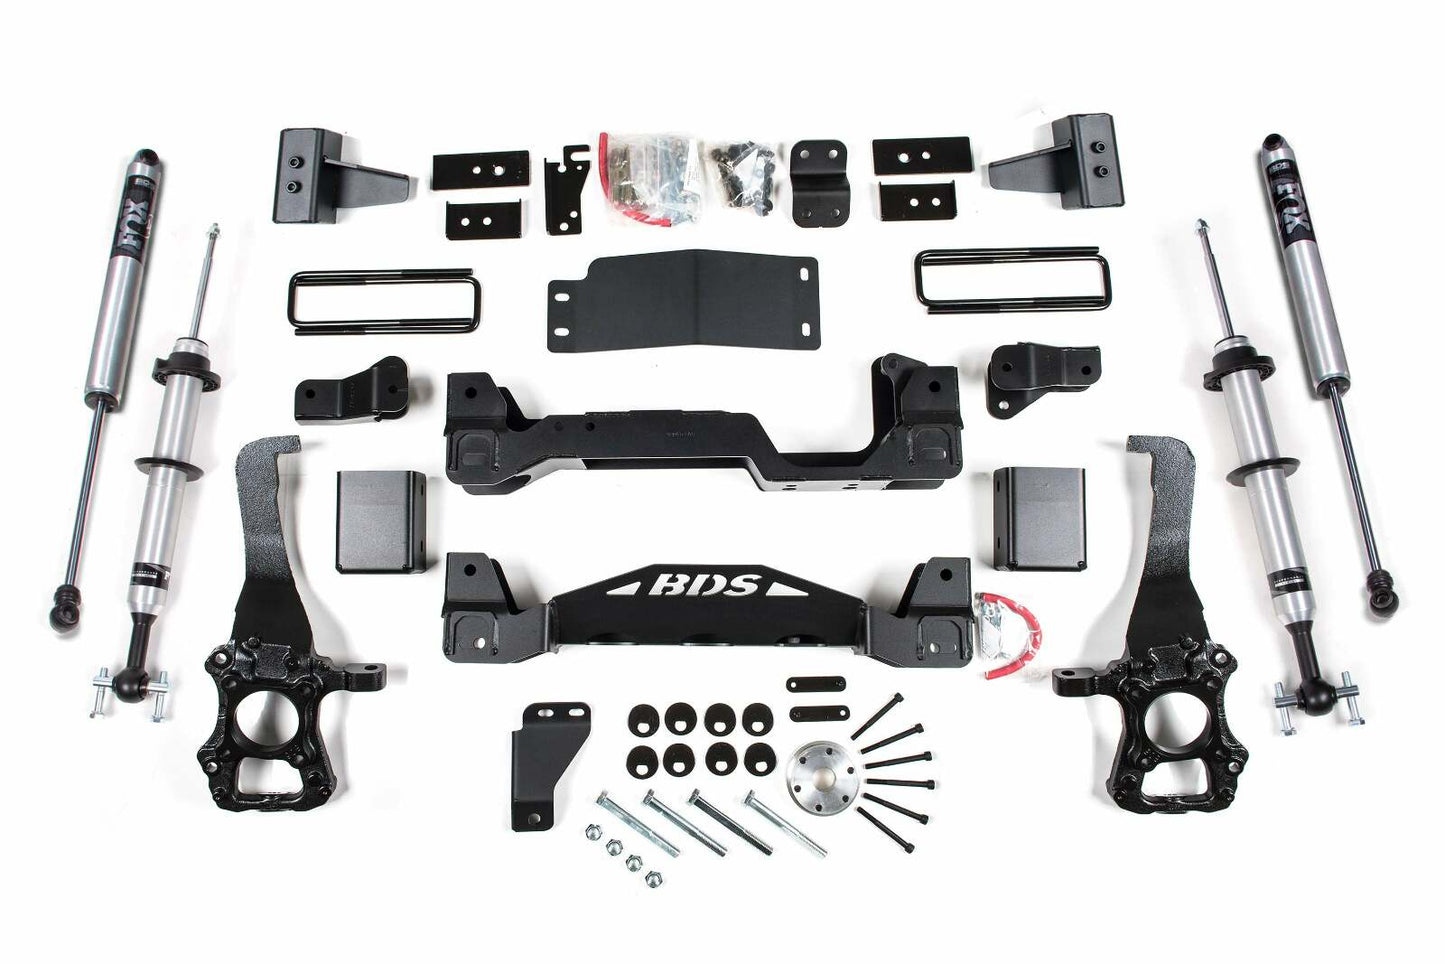 2015-2020 Ford F150 4wd 4" Suspension Lift Kit, 3" Rear Block - Fox 2.0 IFP PS Snap Ring Front, Fox 2.0 IFP PS Rear